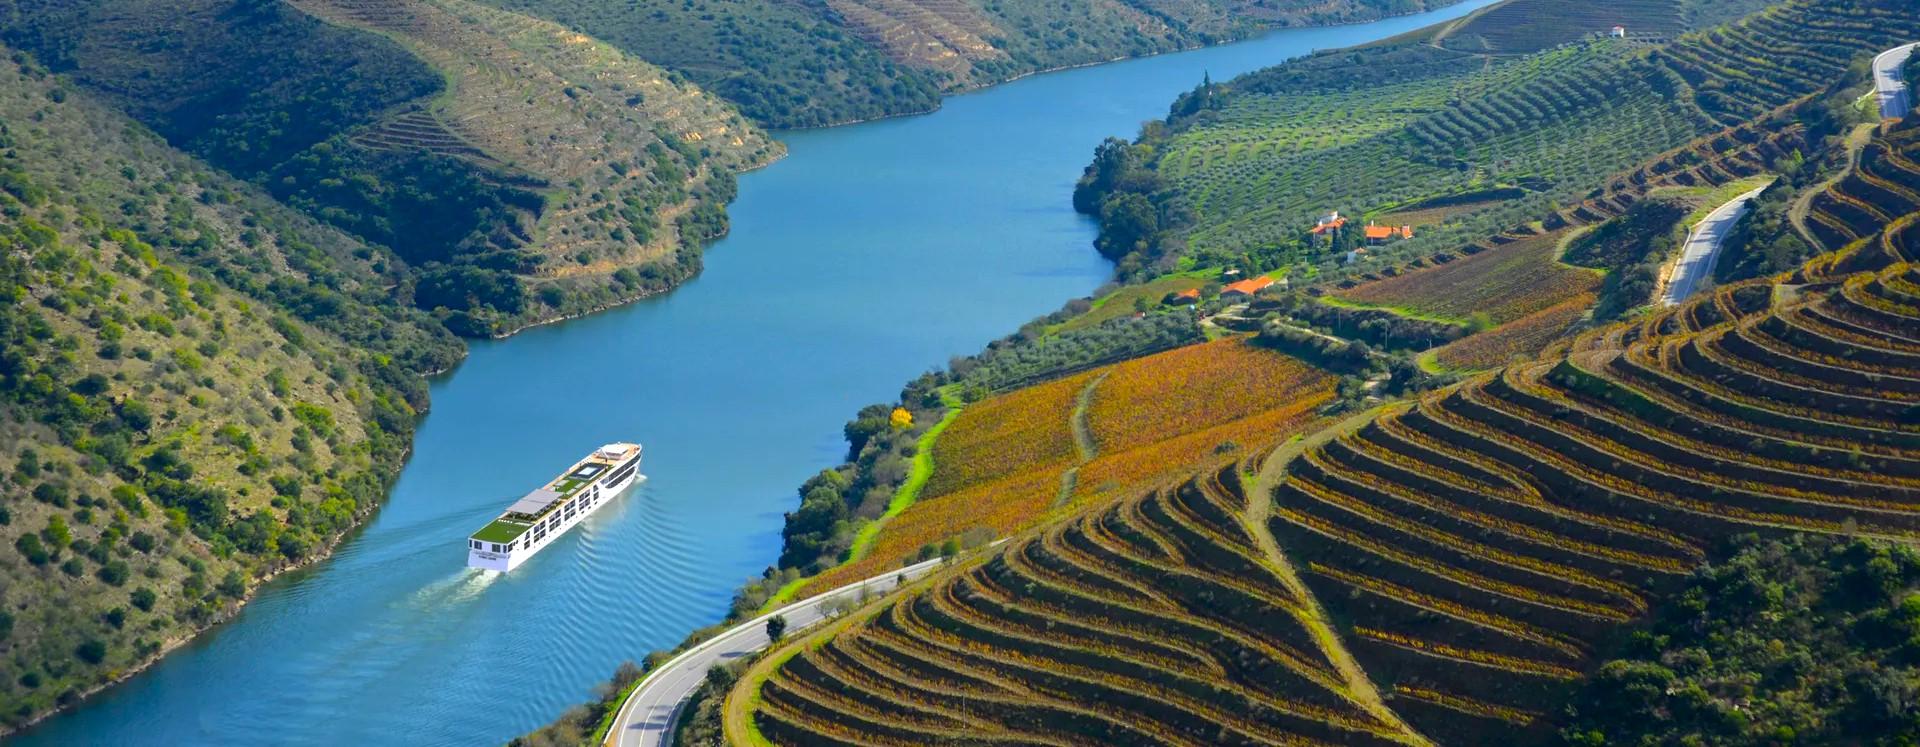 Flavors of Portugal & Spain River Cruise